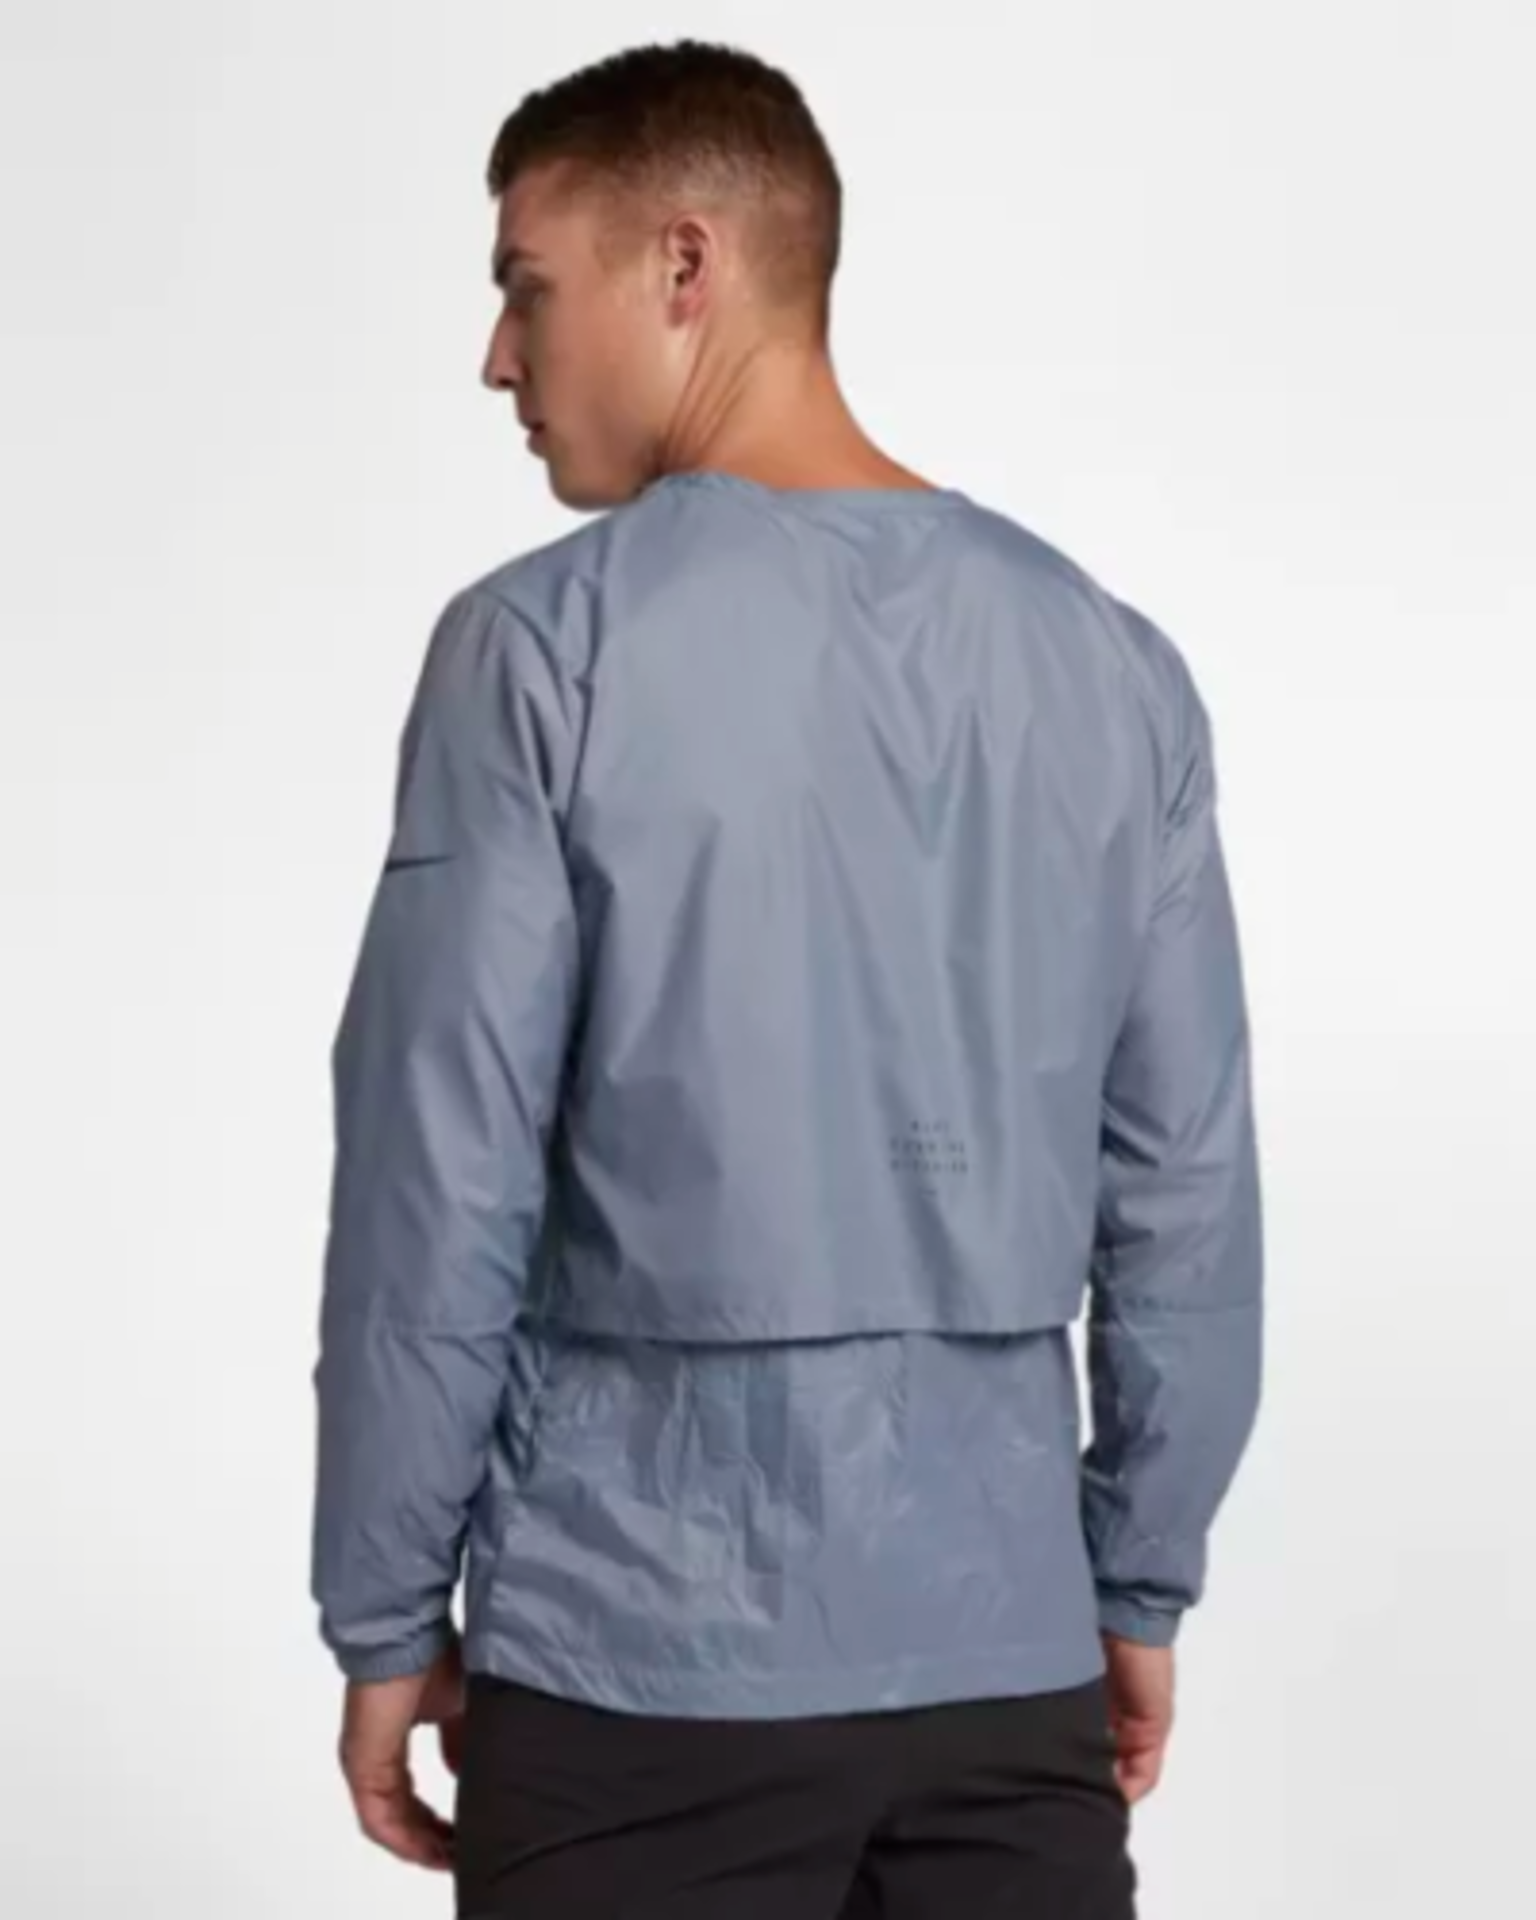 Nike Running Run Division Crinkle Effect Crew Jacket In Grey Size - L 928497- 445 RRP £70 - Image 2 of 2